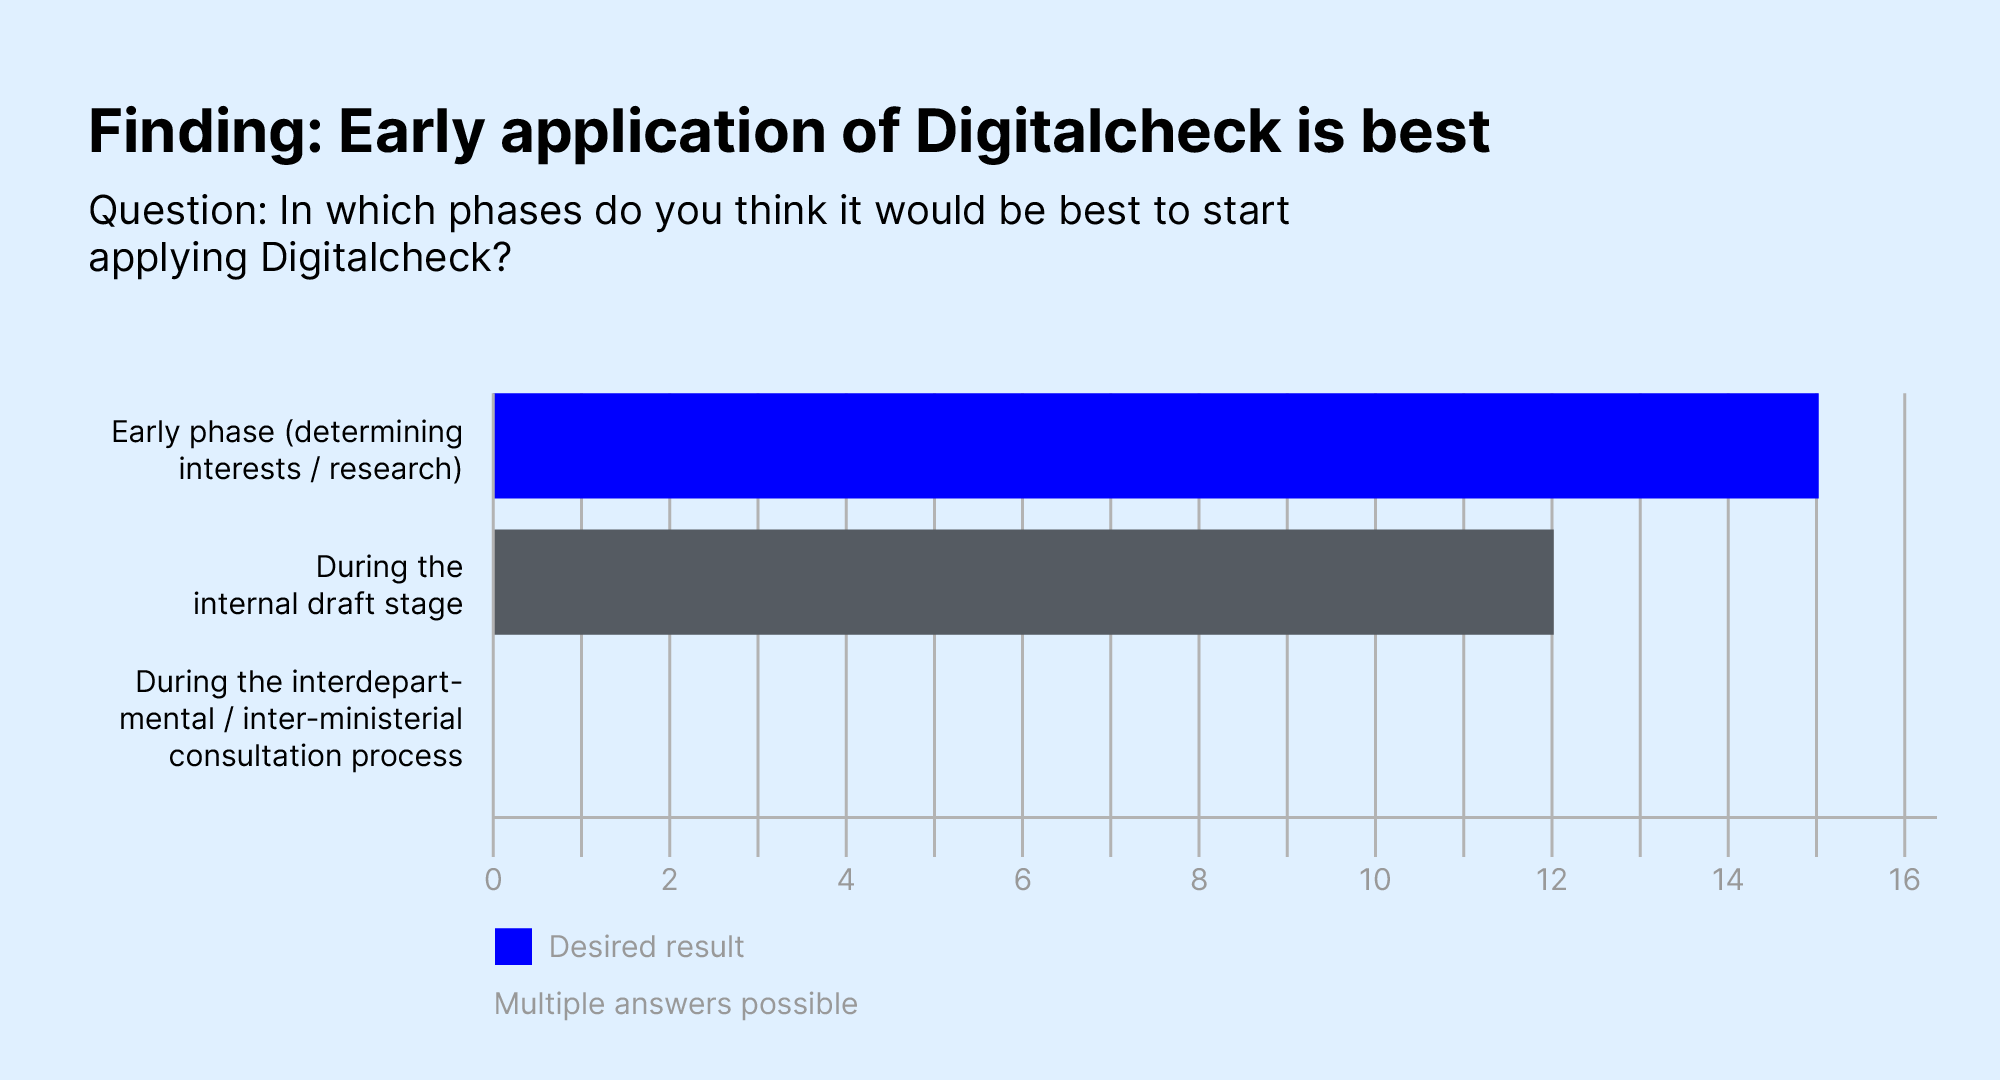 Graphical representation as bar chart, that an early engagement with the digital check is useful.